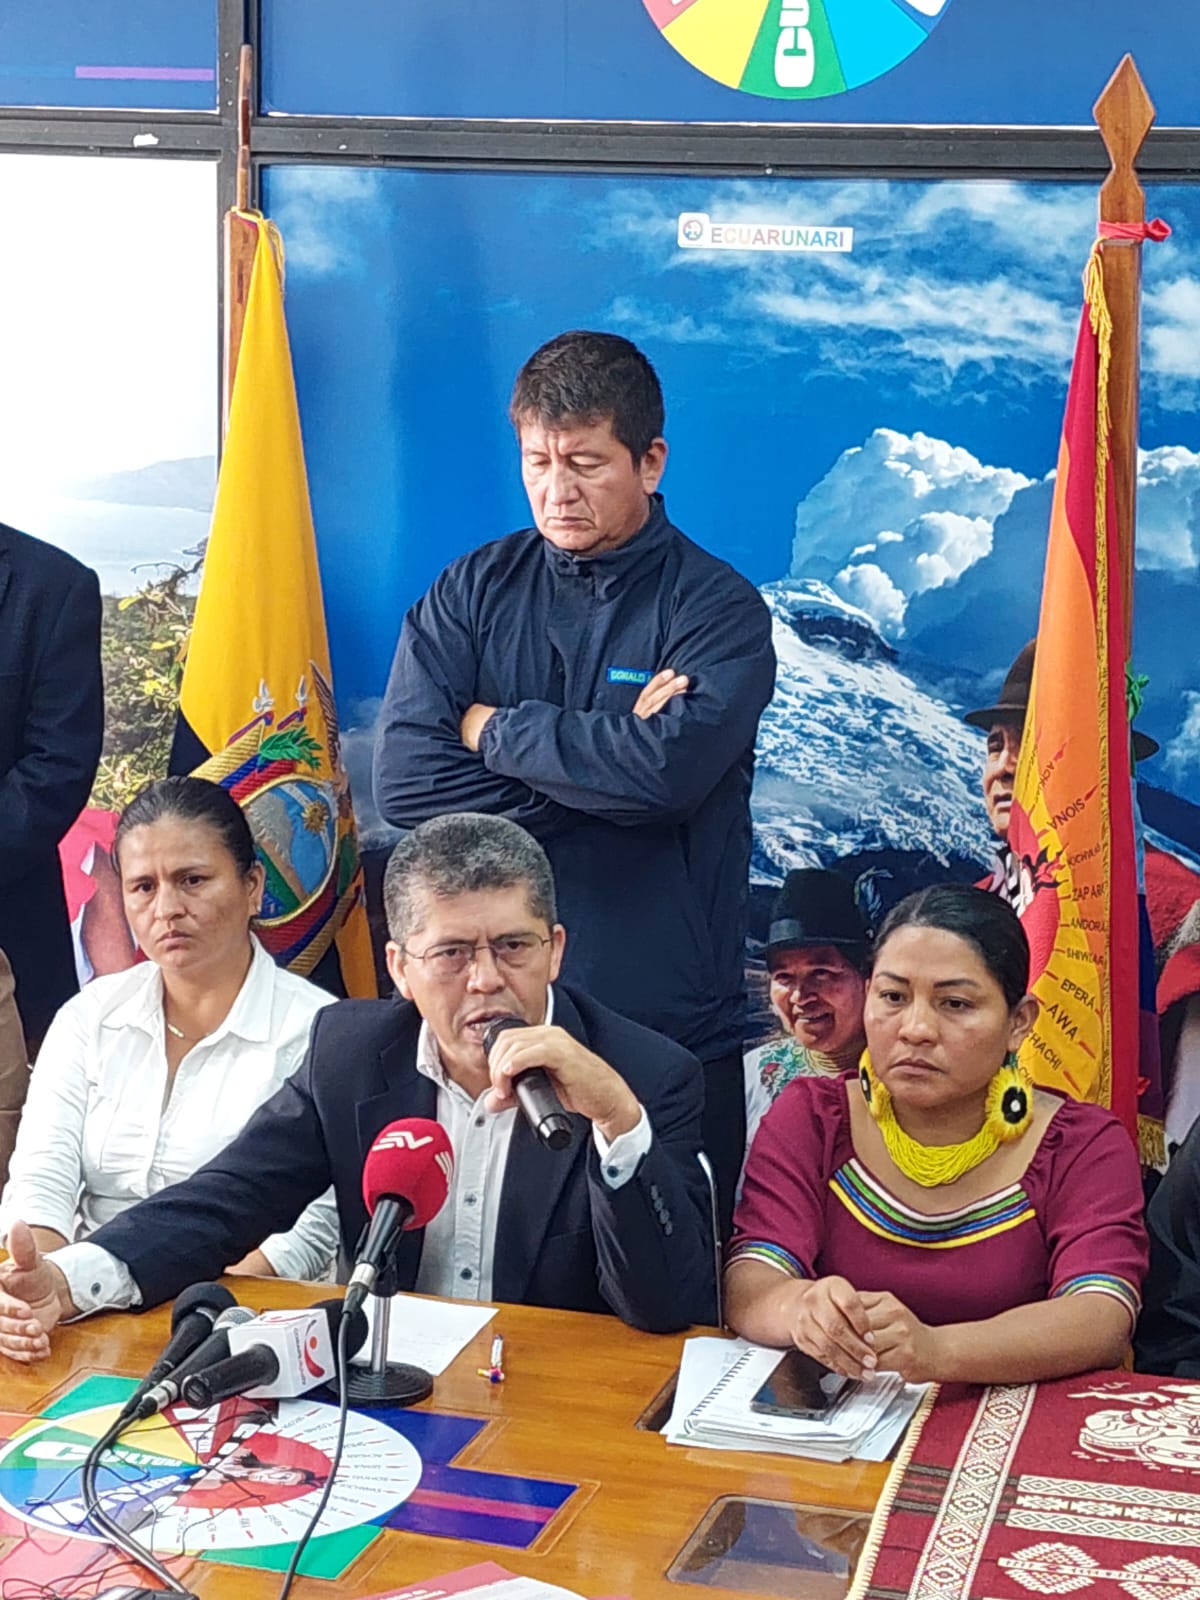 Pablo Fajardo Mendoza is seated and is speaking into a microphone. There are several other microphones in front of him. He is flanked by two women and there is a man standing behind him.